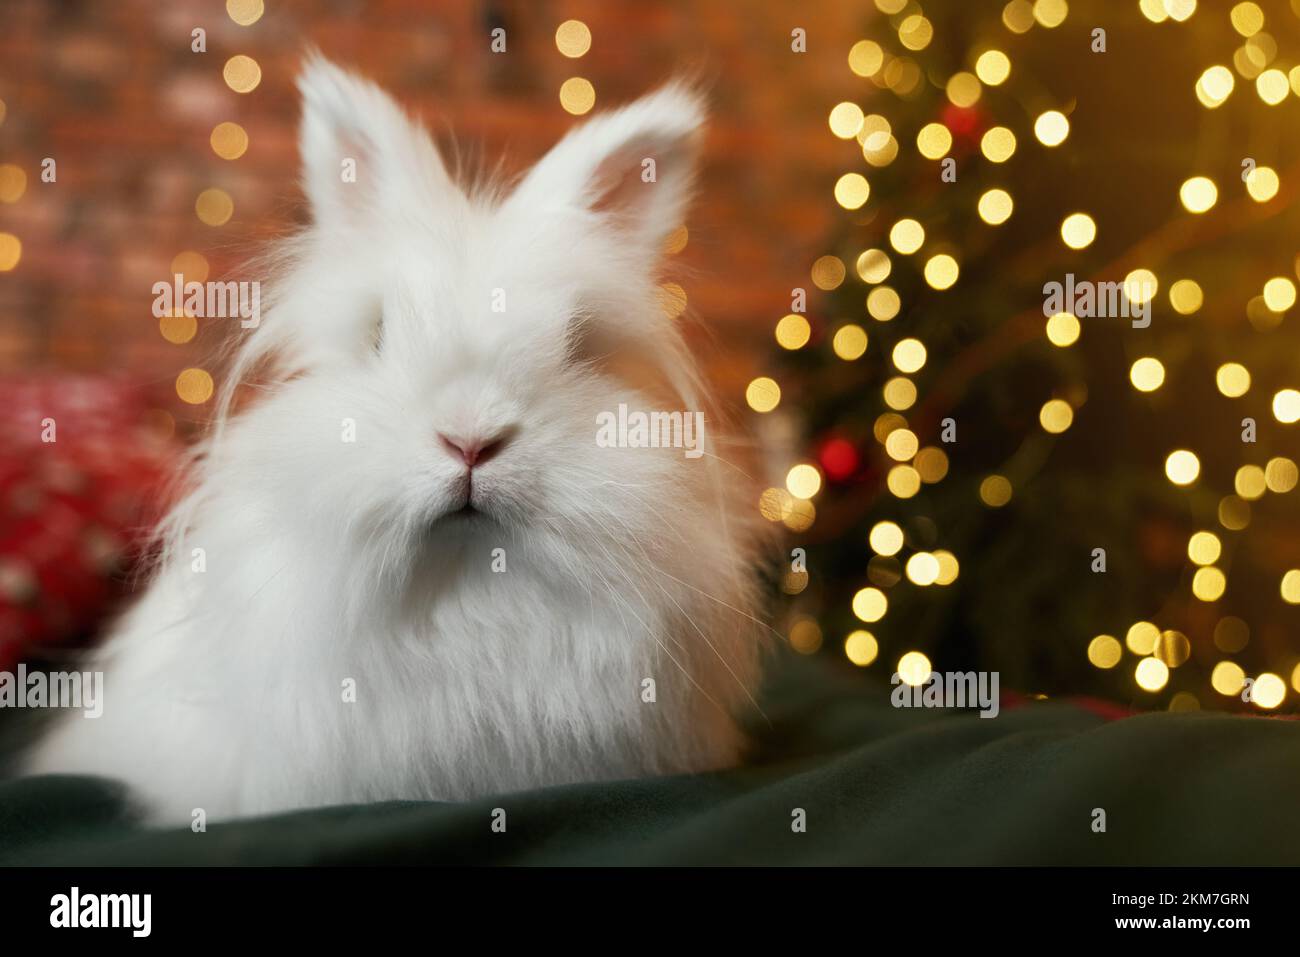 Front view of cute, furry rabbit sitting on green sofa, posing. Symbol of new year posing indoors, in room decorated with sparkling garlands. Concept Stock Photo